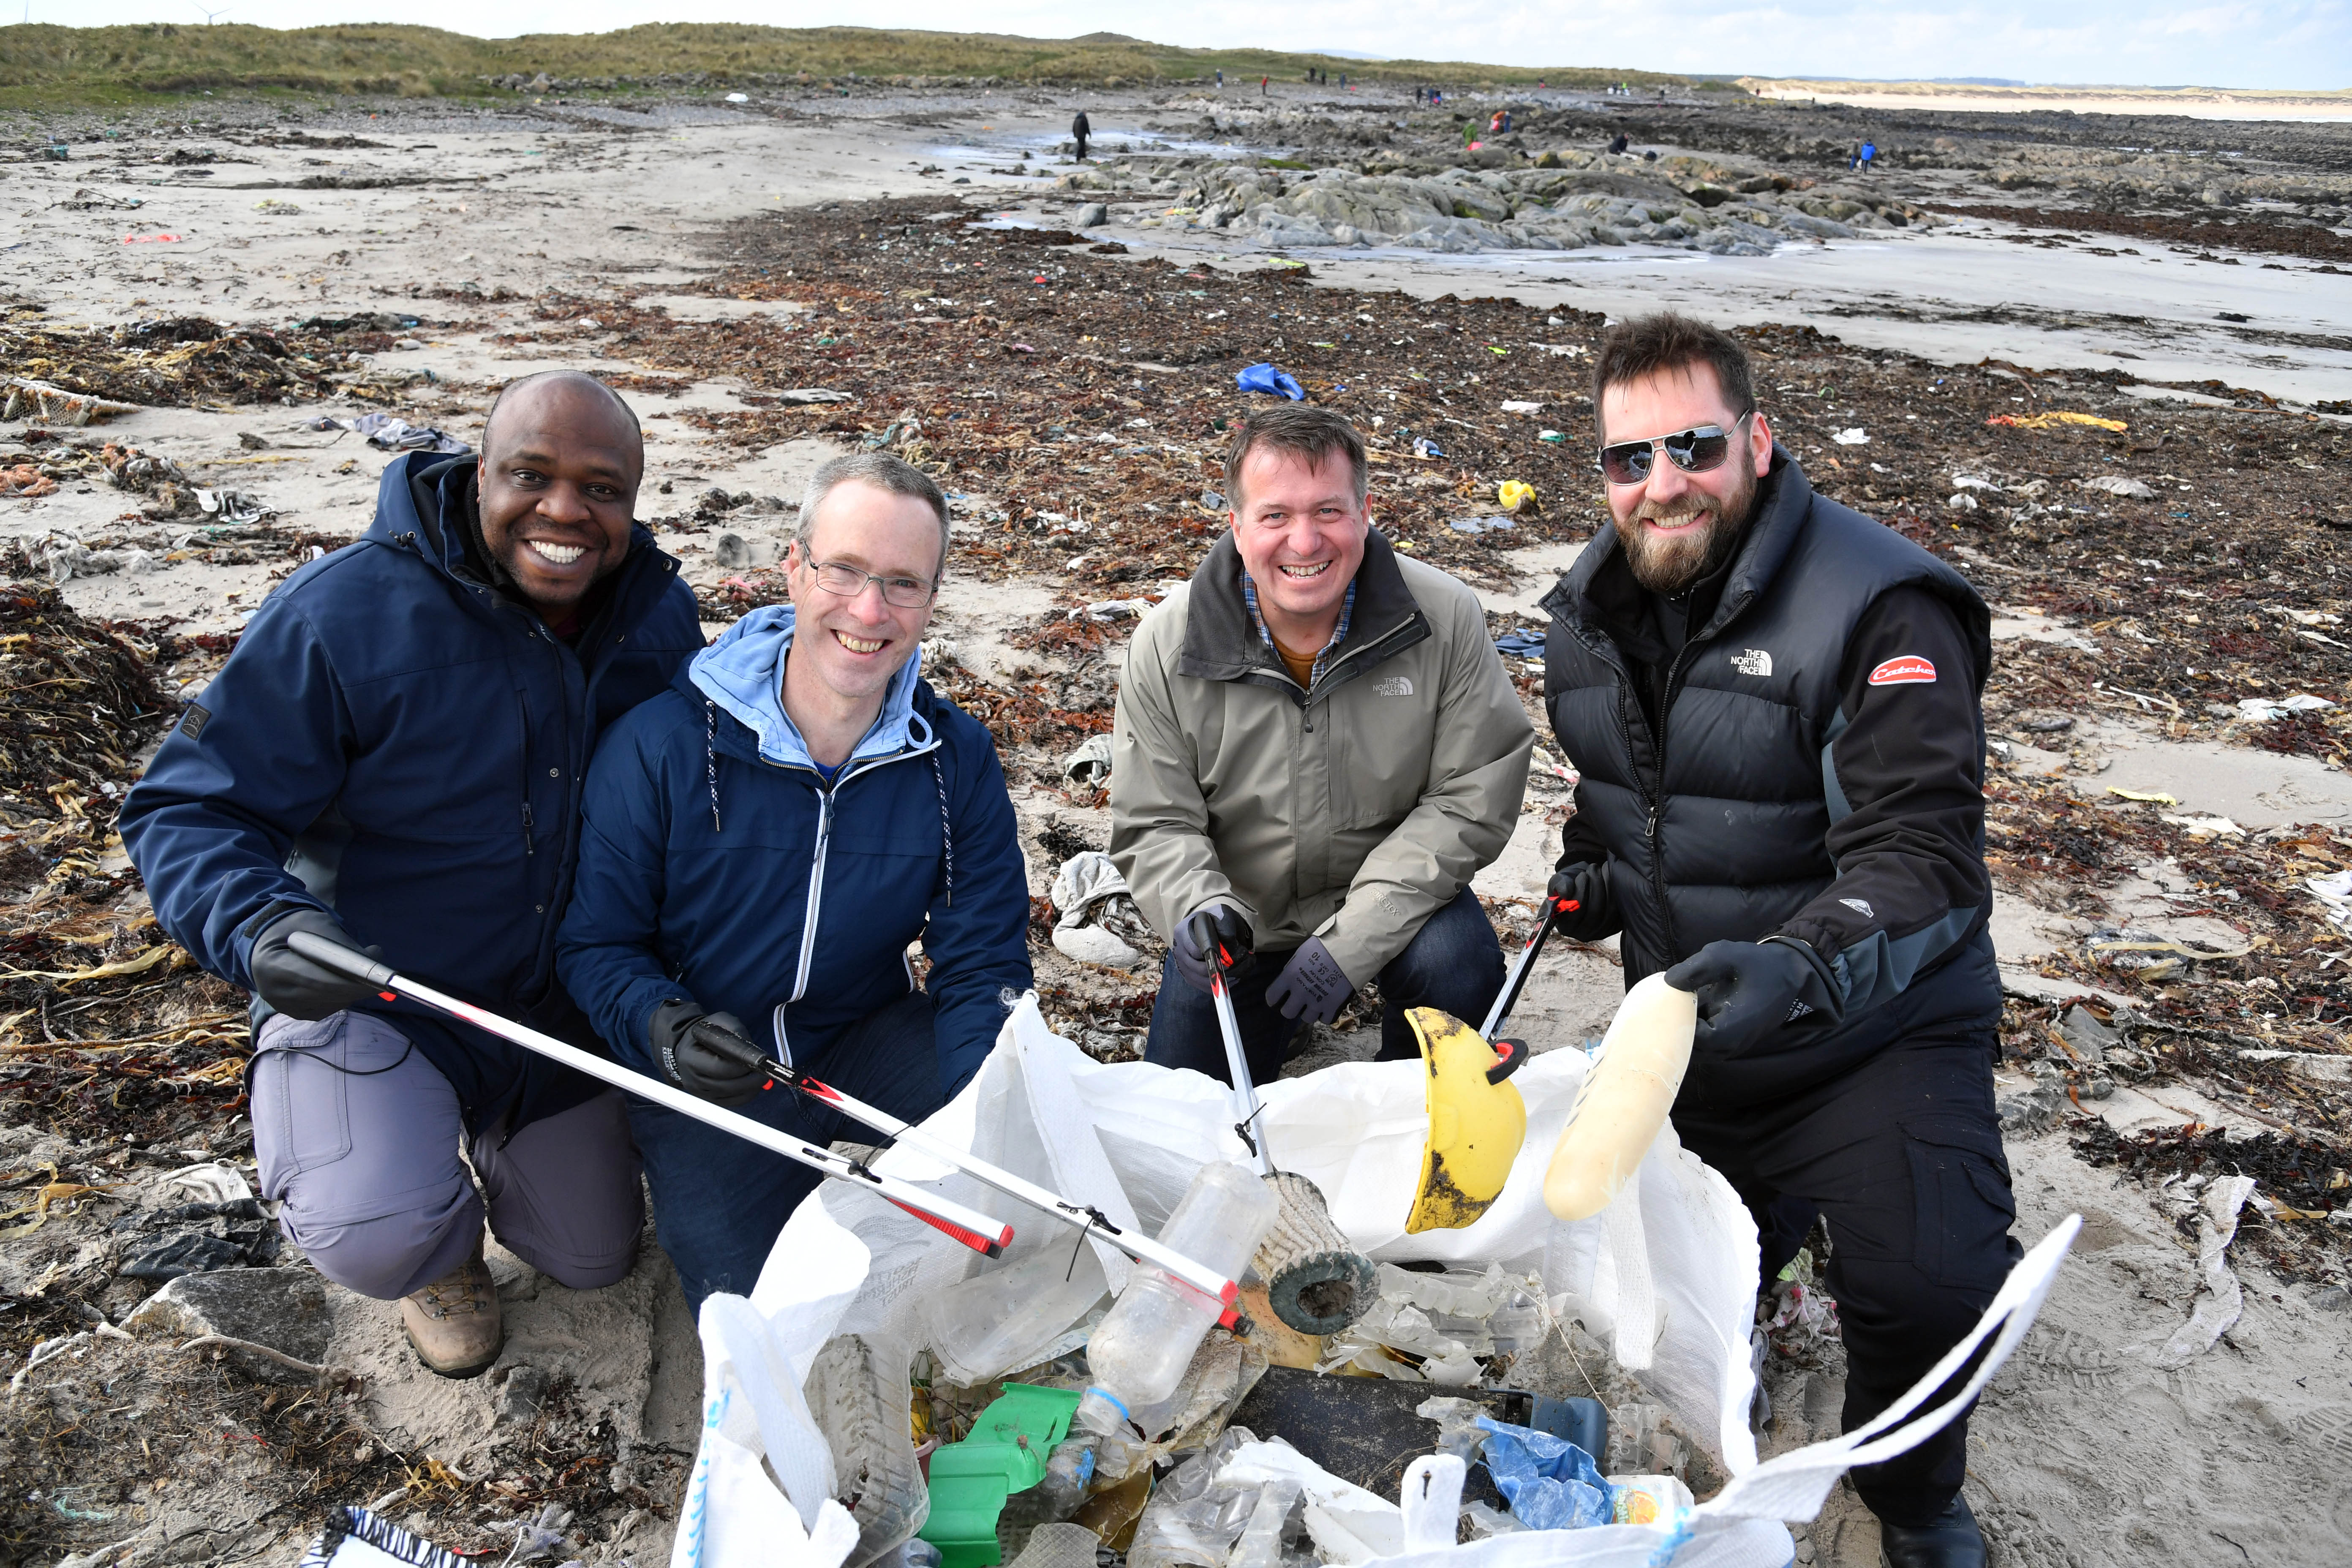 Premier Oil beach clean at Cairnbulg.

L-R: Jacob Opata, Martin O'donnell, Paul Williams and Lee Gilmore